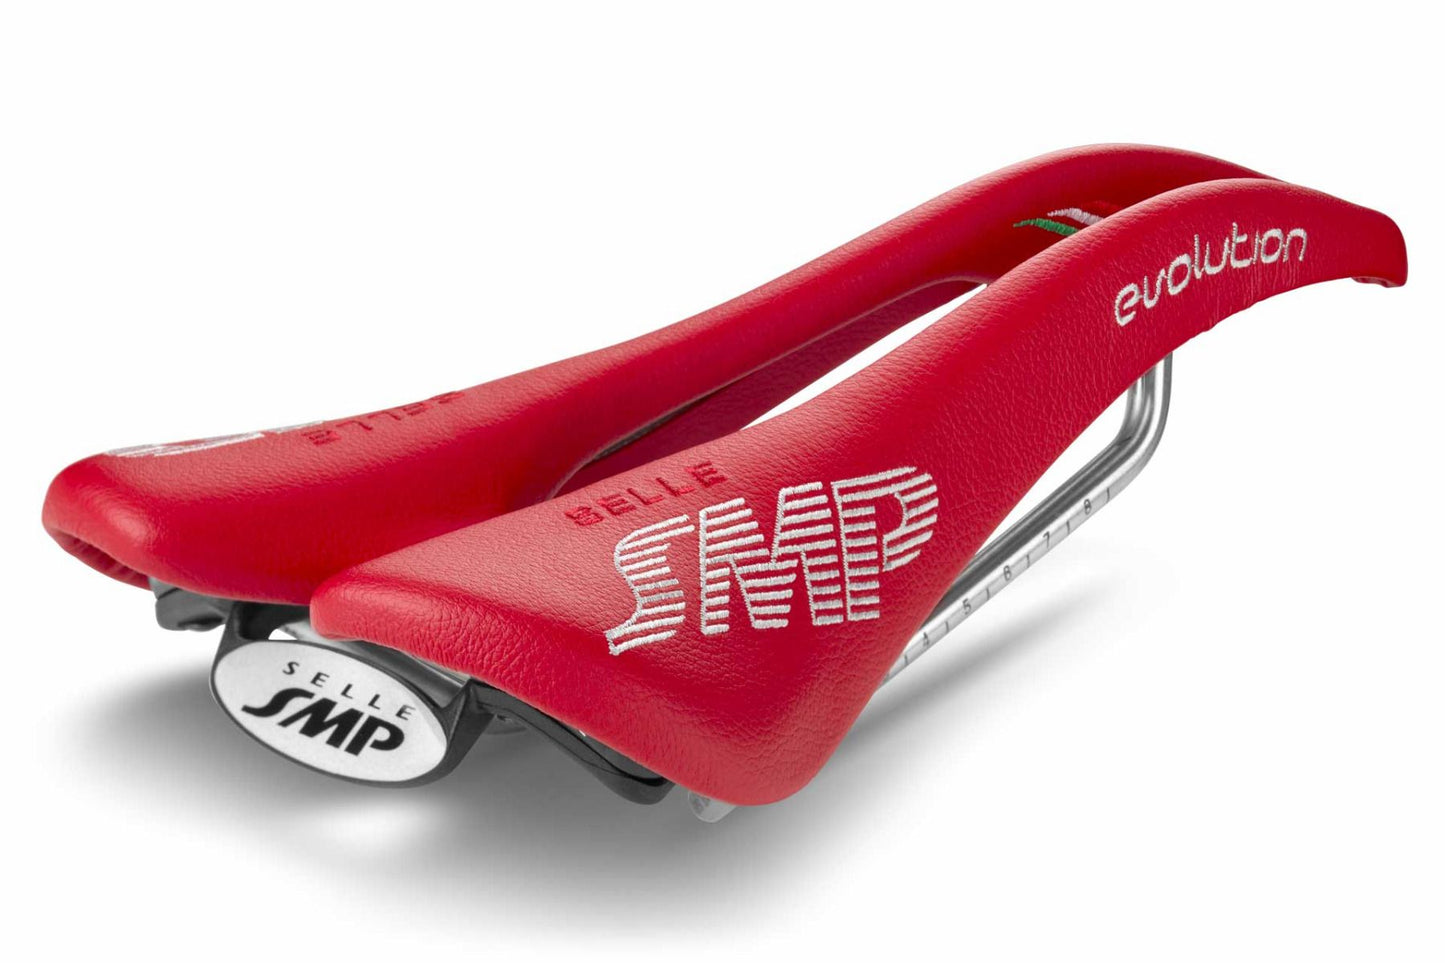 Selle SMP Evolution Saddle with Steel Rails (Red)